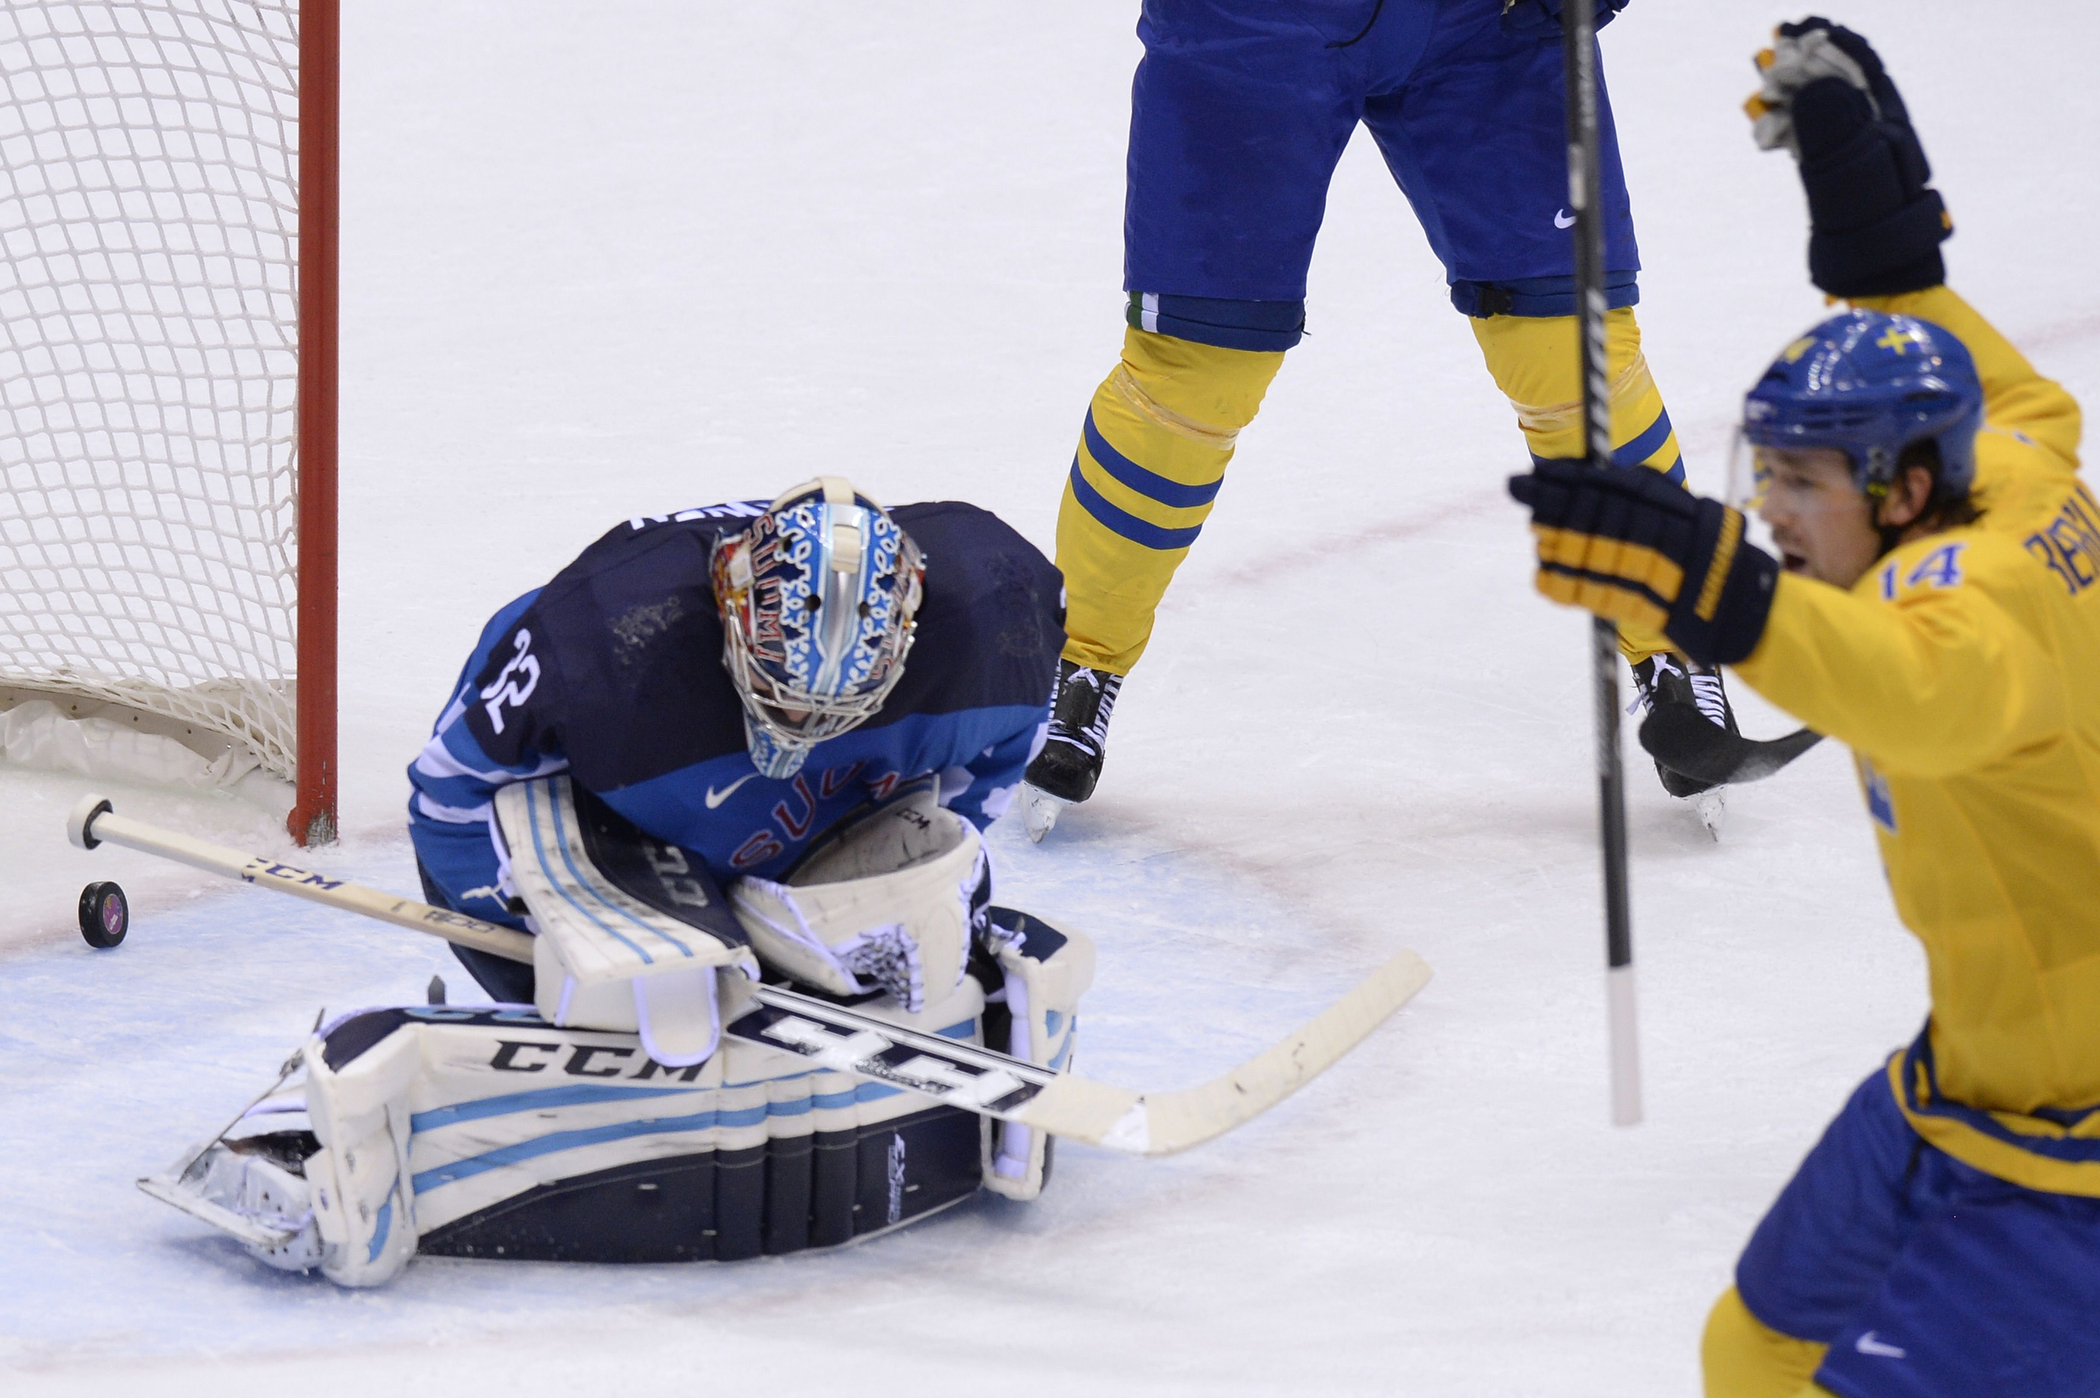 Finland's goalkeeper Kari Lehtonen (L) fails to stop a goal during the Men's Ice Hockey Semifinal match between Sweden and Finland.